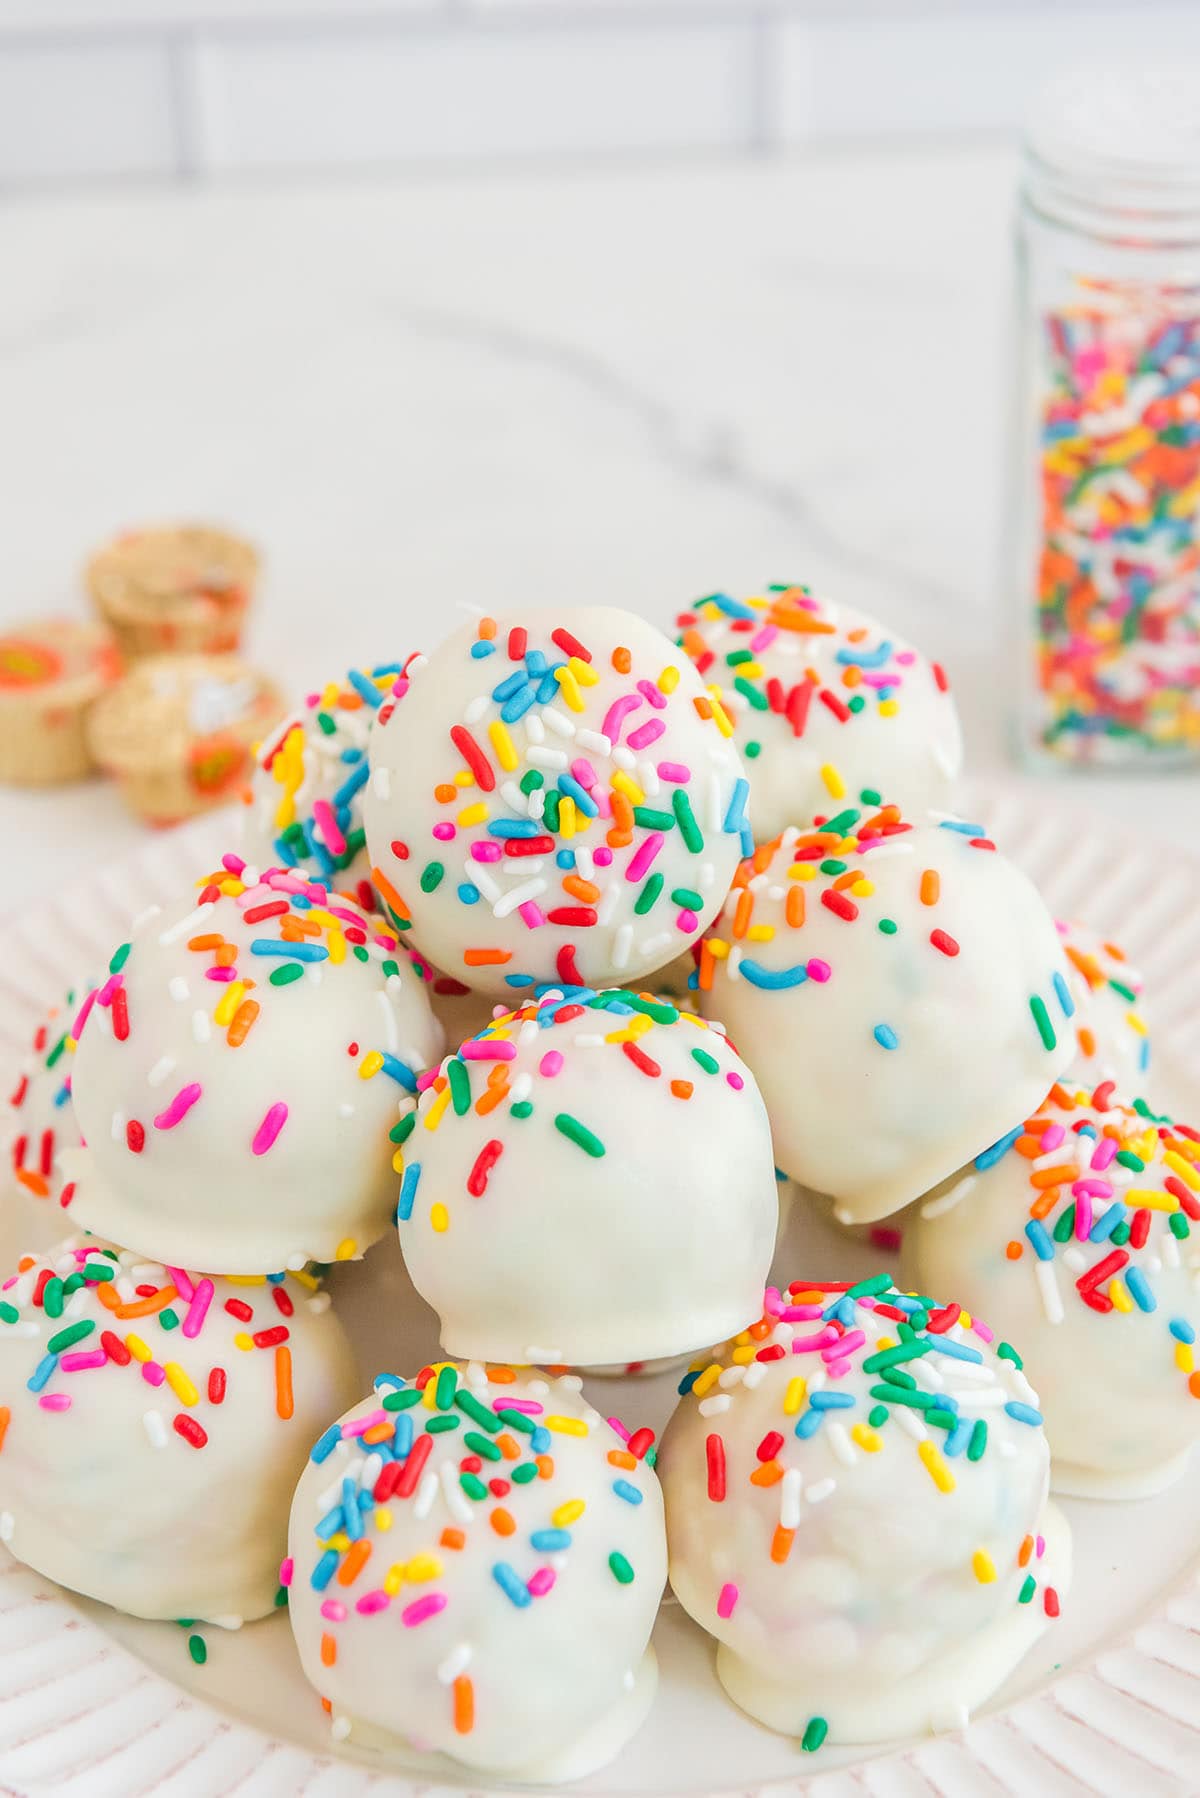 Surprise Inside Cheesecake Bites with sprinkles on a white plate.